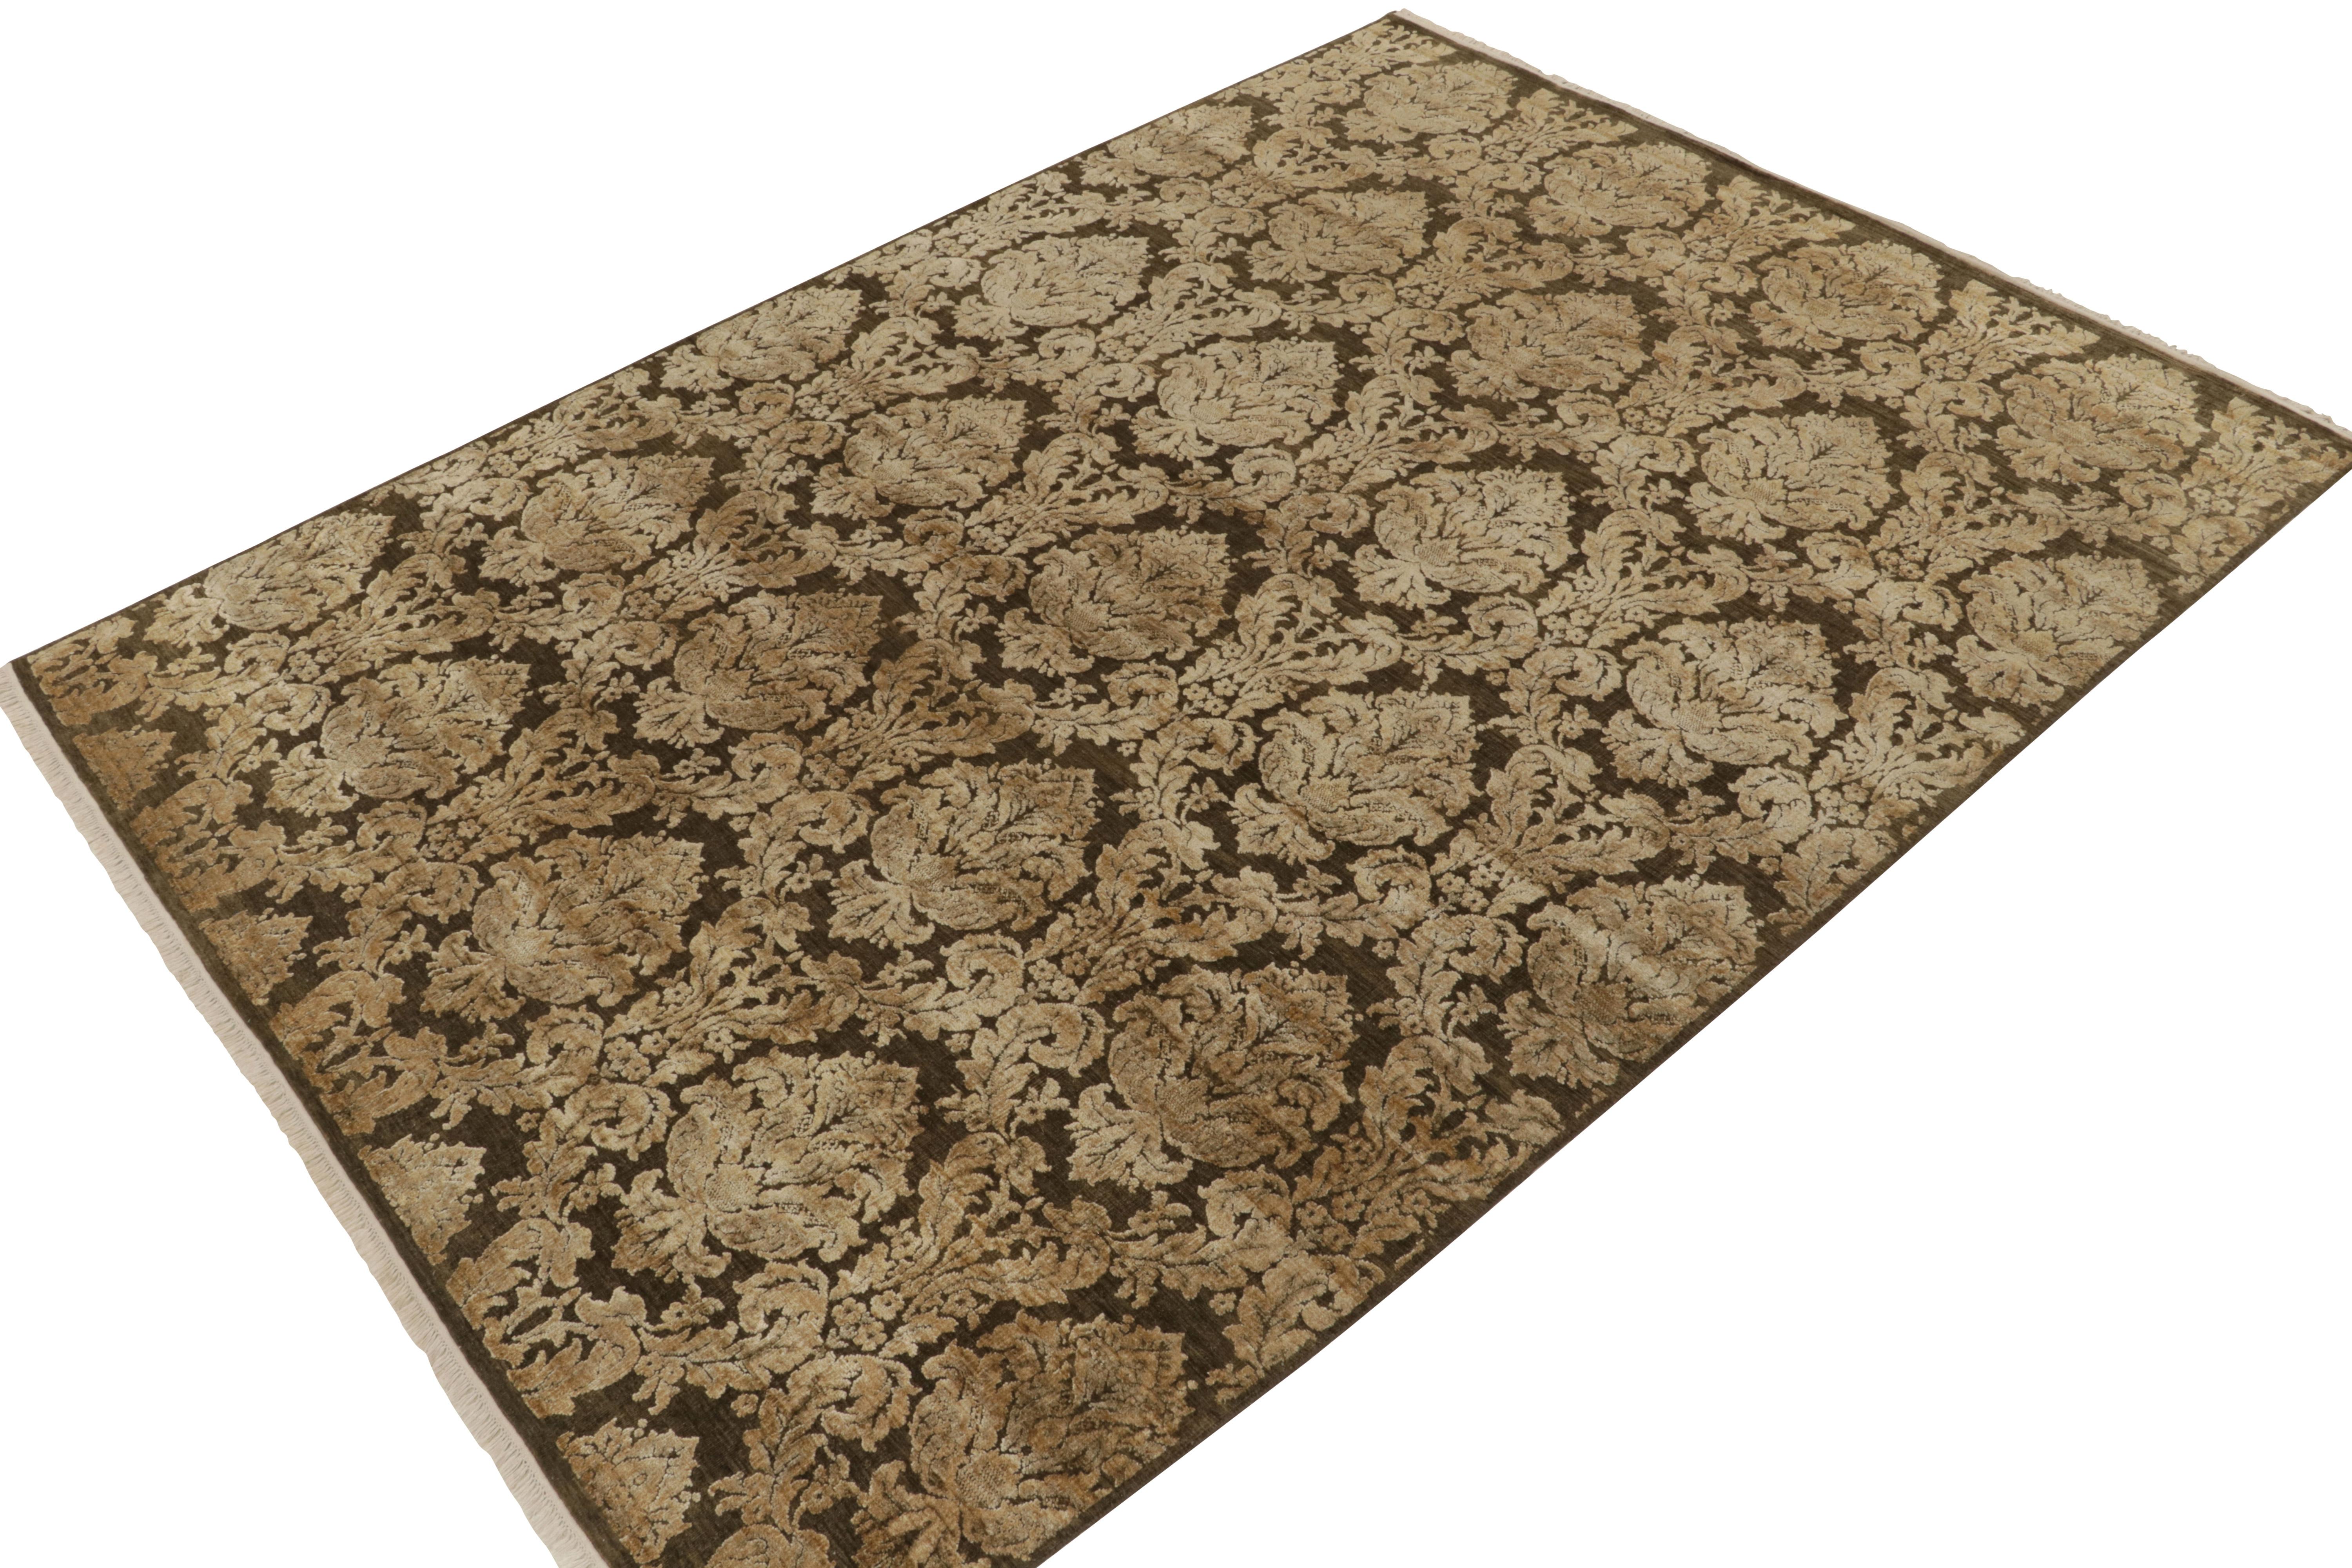 Hand-knotted in a fine blend of wool & silk, a 9x12 contemporary rug from our Modern Classics collection. 

On the Design: This piece enjoys classic European inspirations, particularly by antique Italian floral crests gold and beige tones on rich